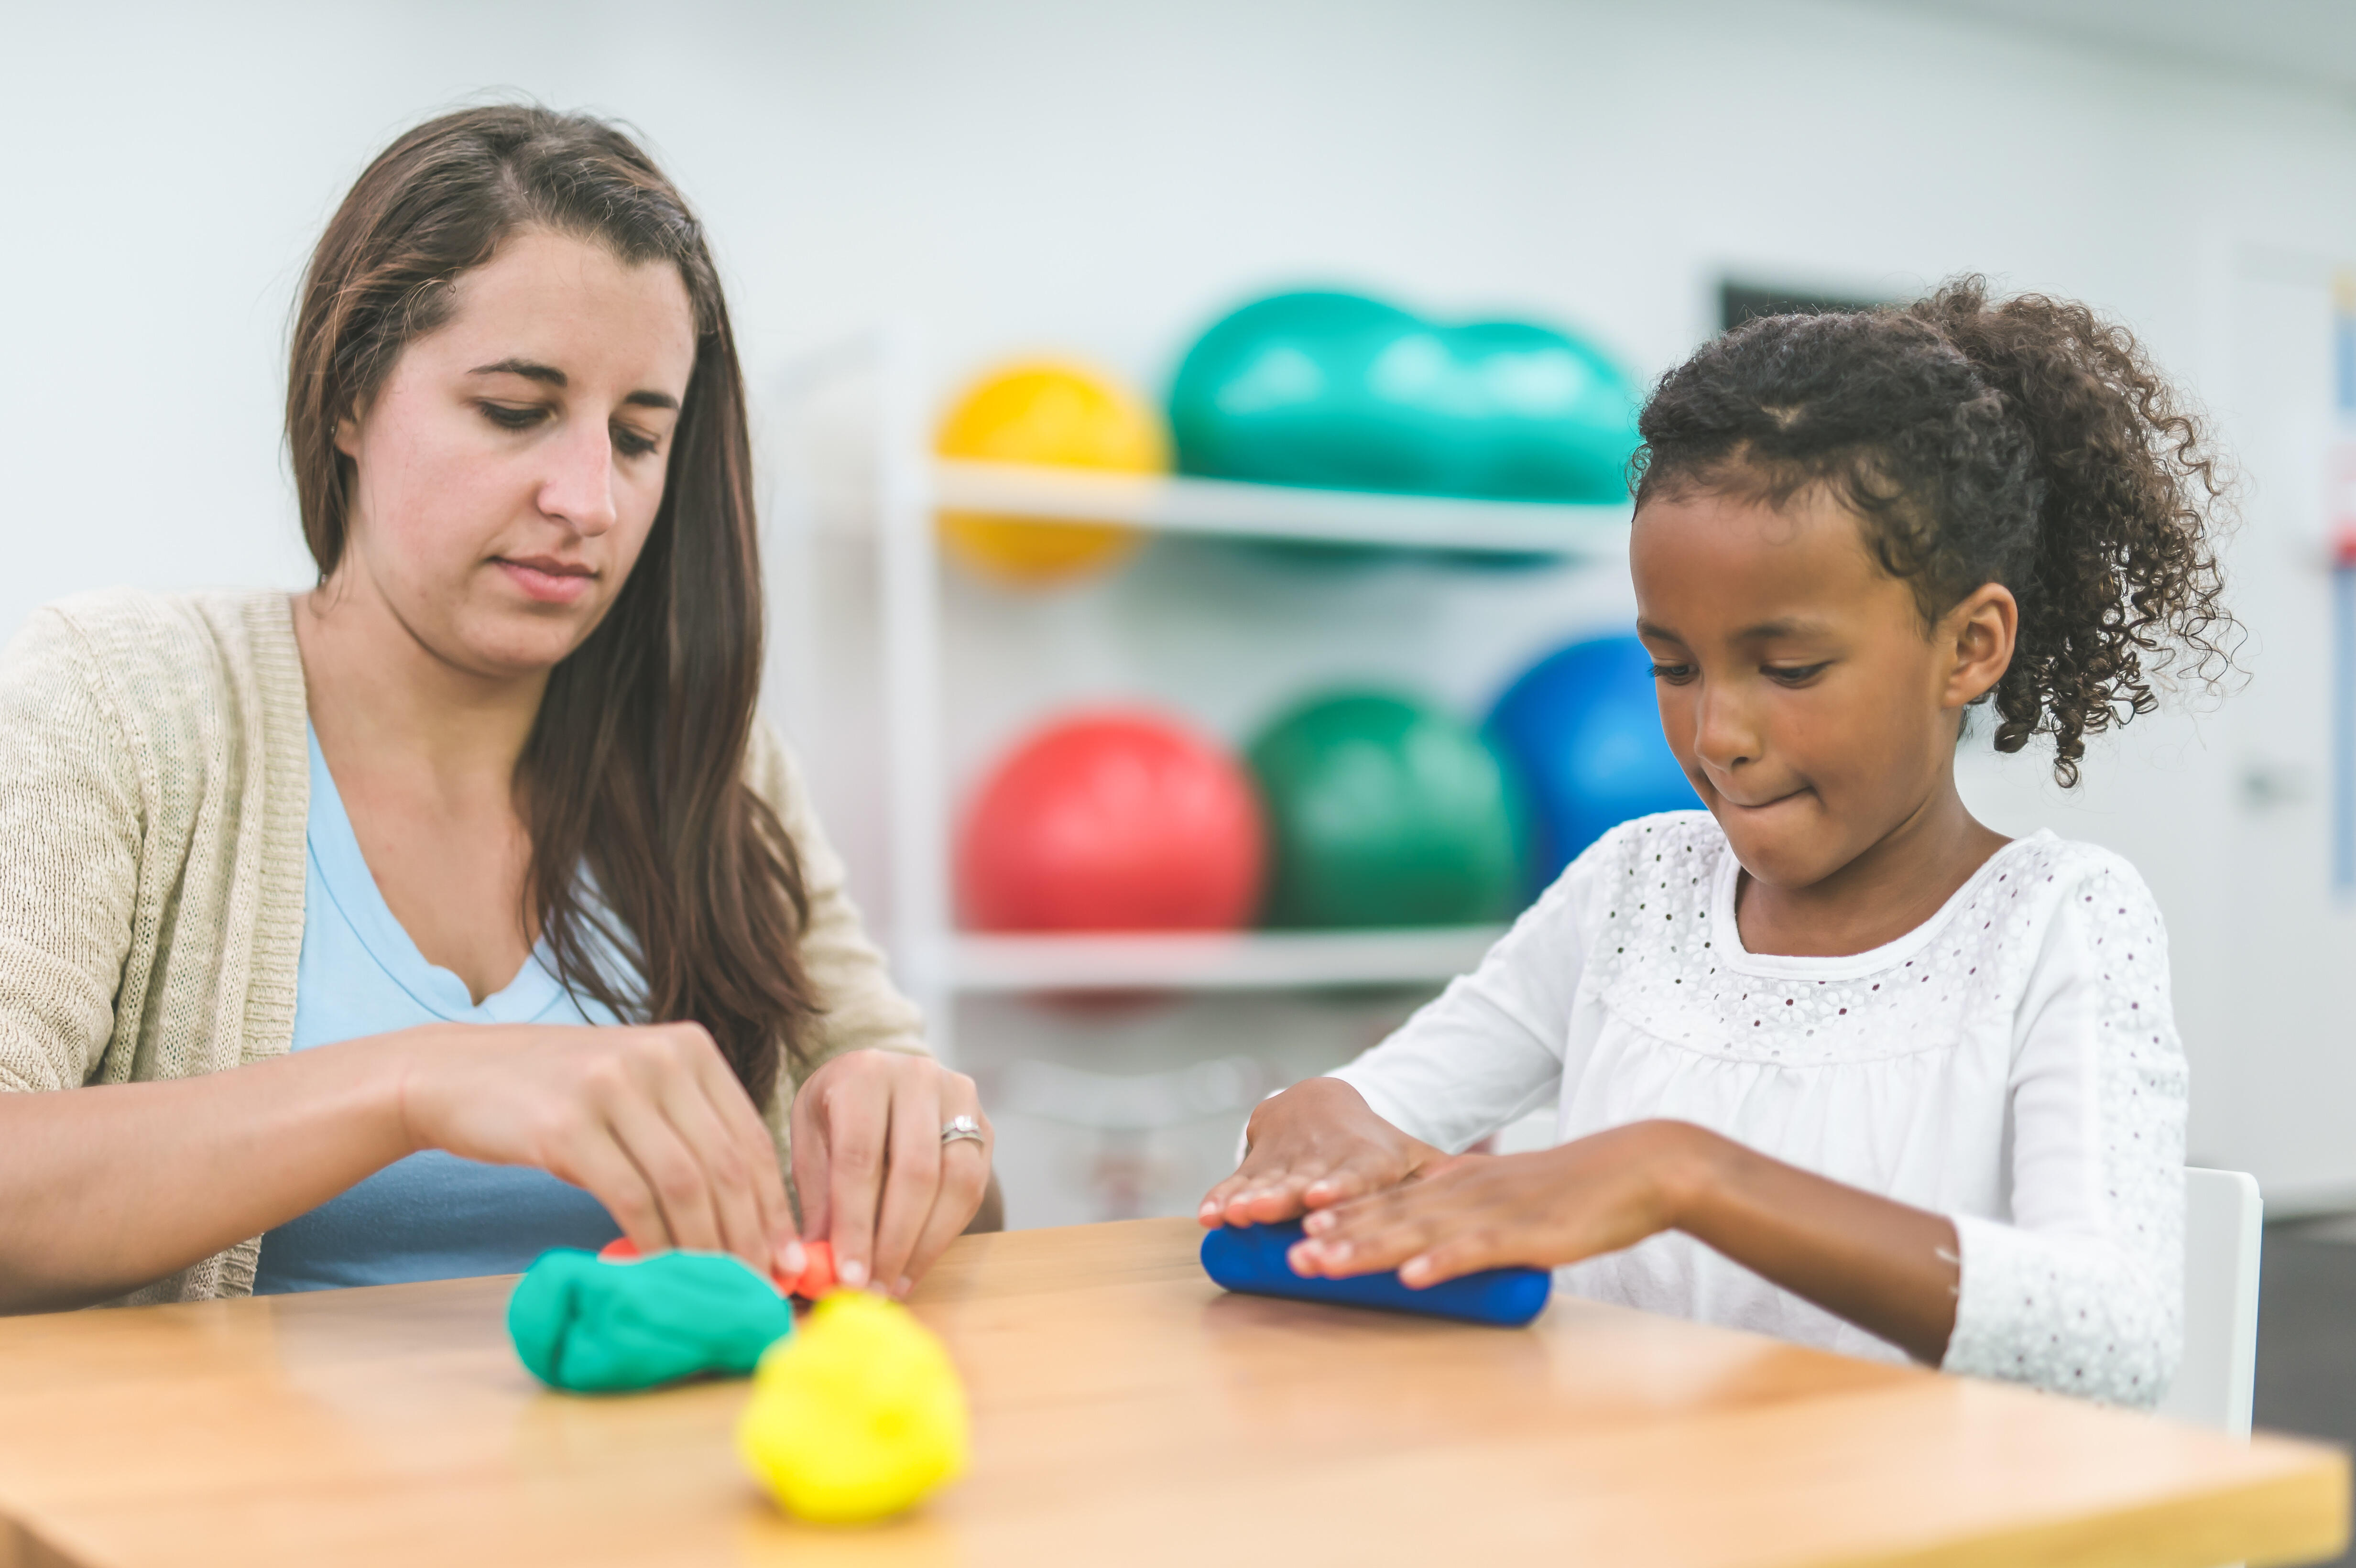 A female occupational therapist is doing rehabilitation with a child patient